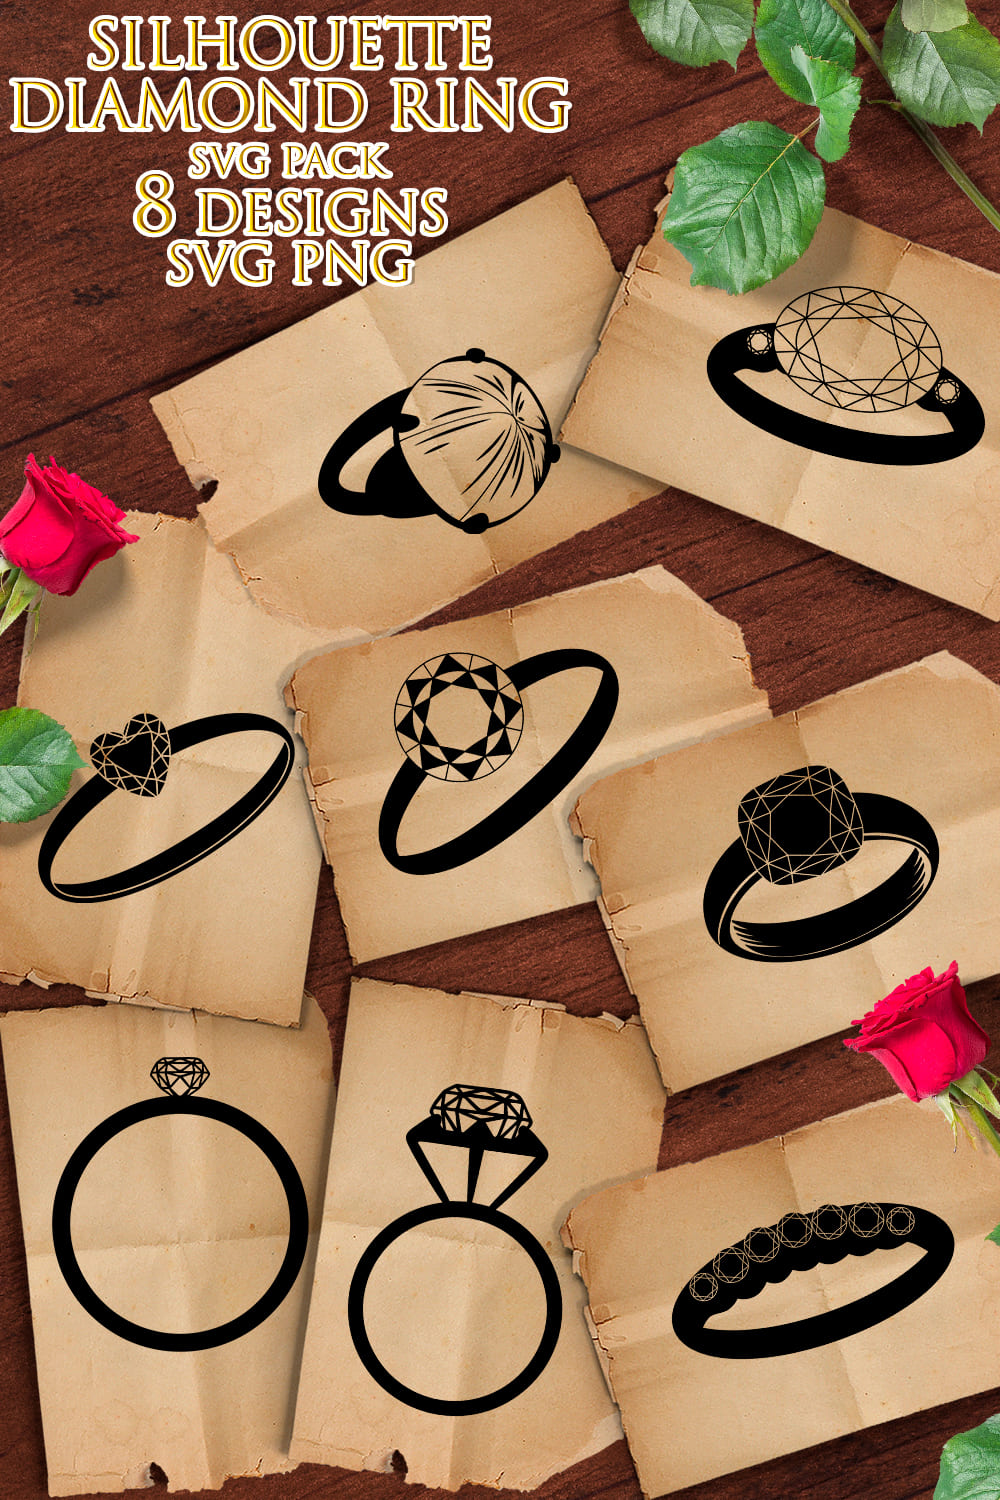 Silhouette Diamond Ring SVG - pinterest image preview.